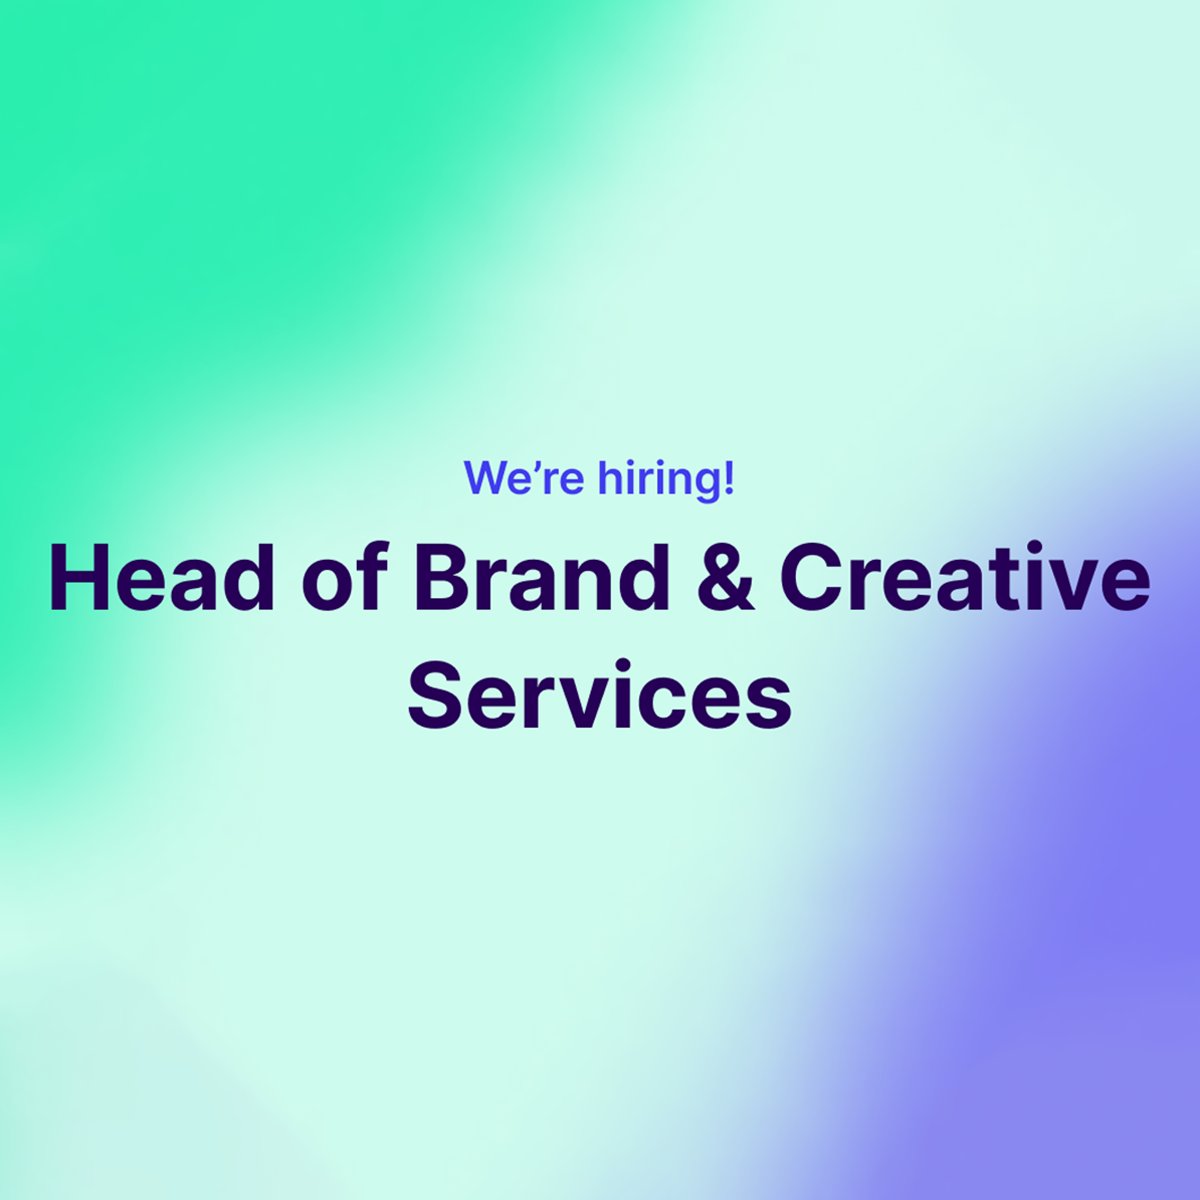 Mega Block Gaming is growing 🚀

Head of Brand & Creative Services - primary responsibility: steering our brands creative direction & ensuring the seamless integration of brand strategy.

Apply now - link in bio 🔗

#Hiring #HeadOfBrand #CreativeServices #Casino #Gambling #Remote